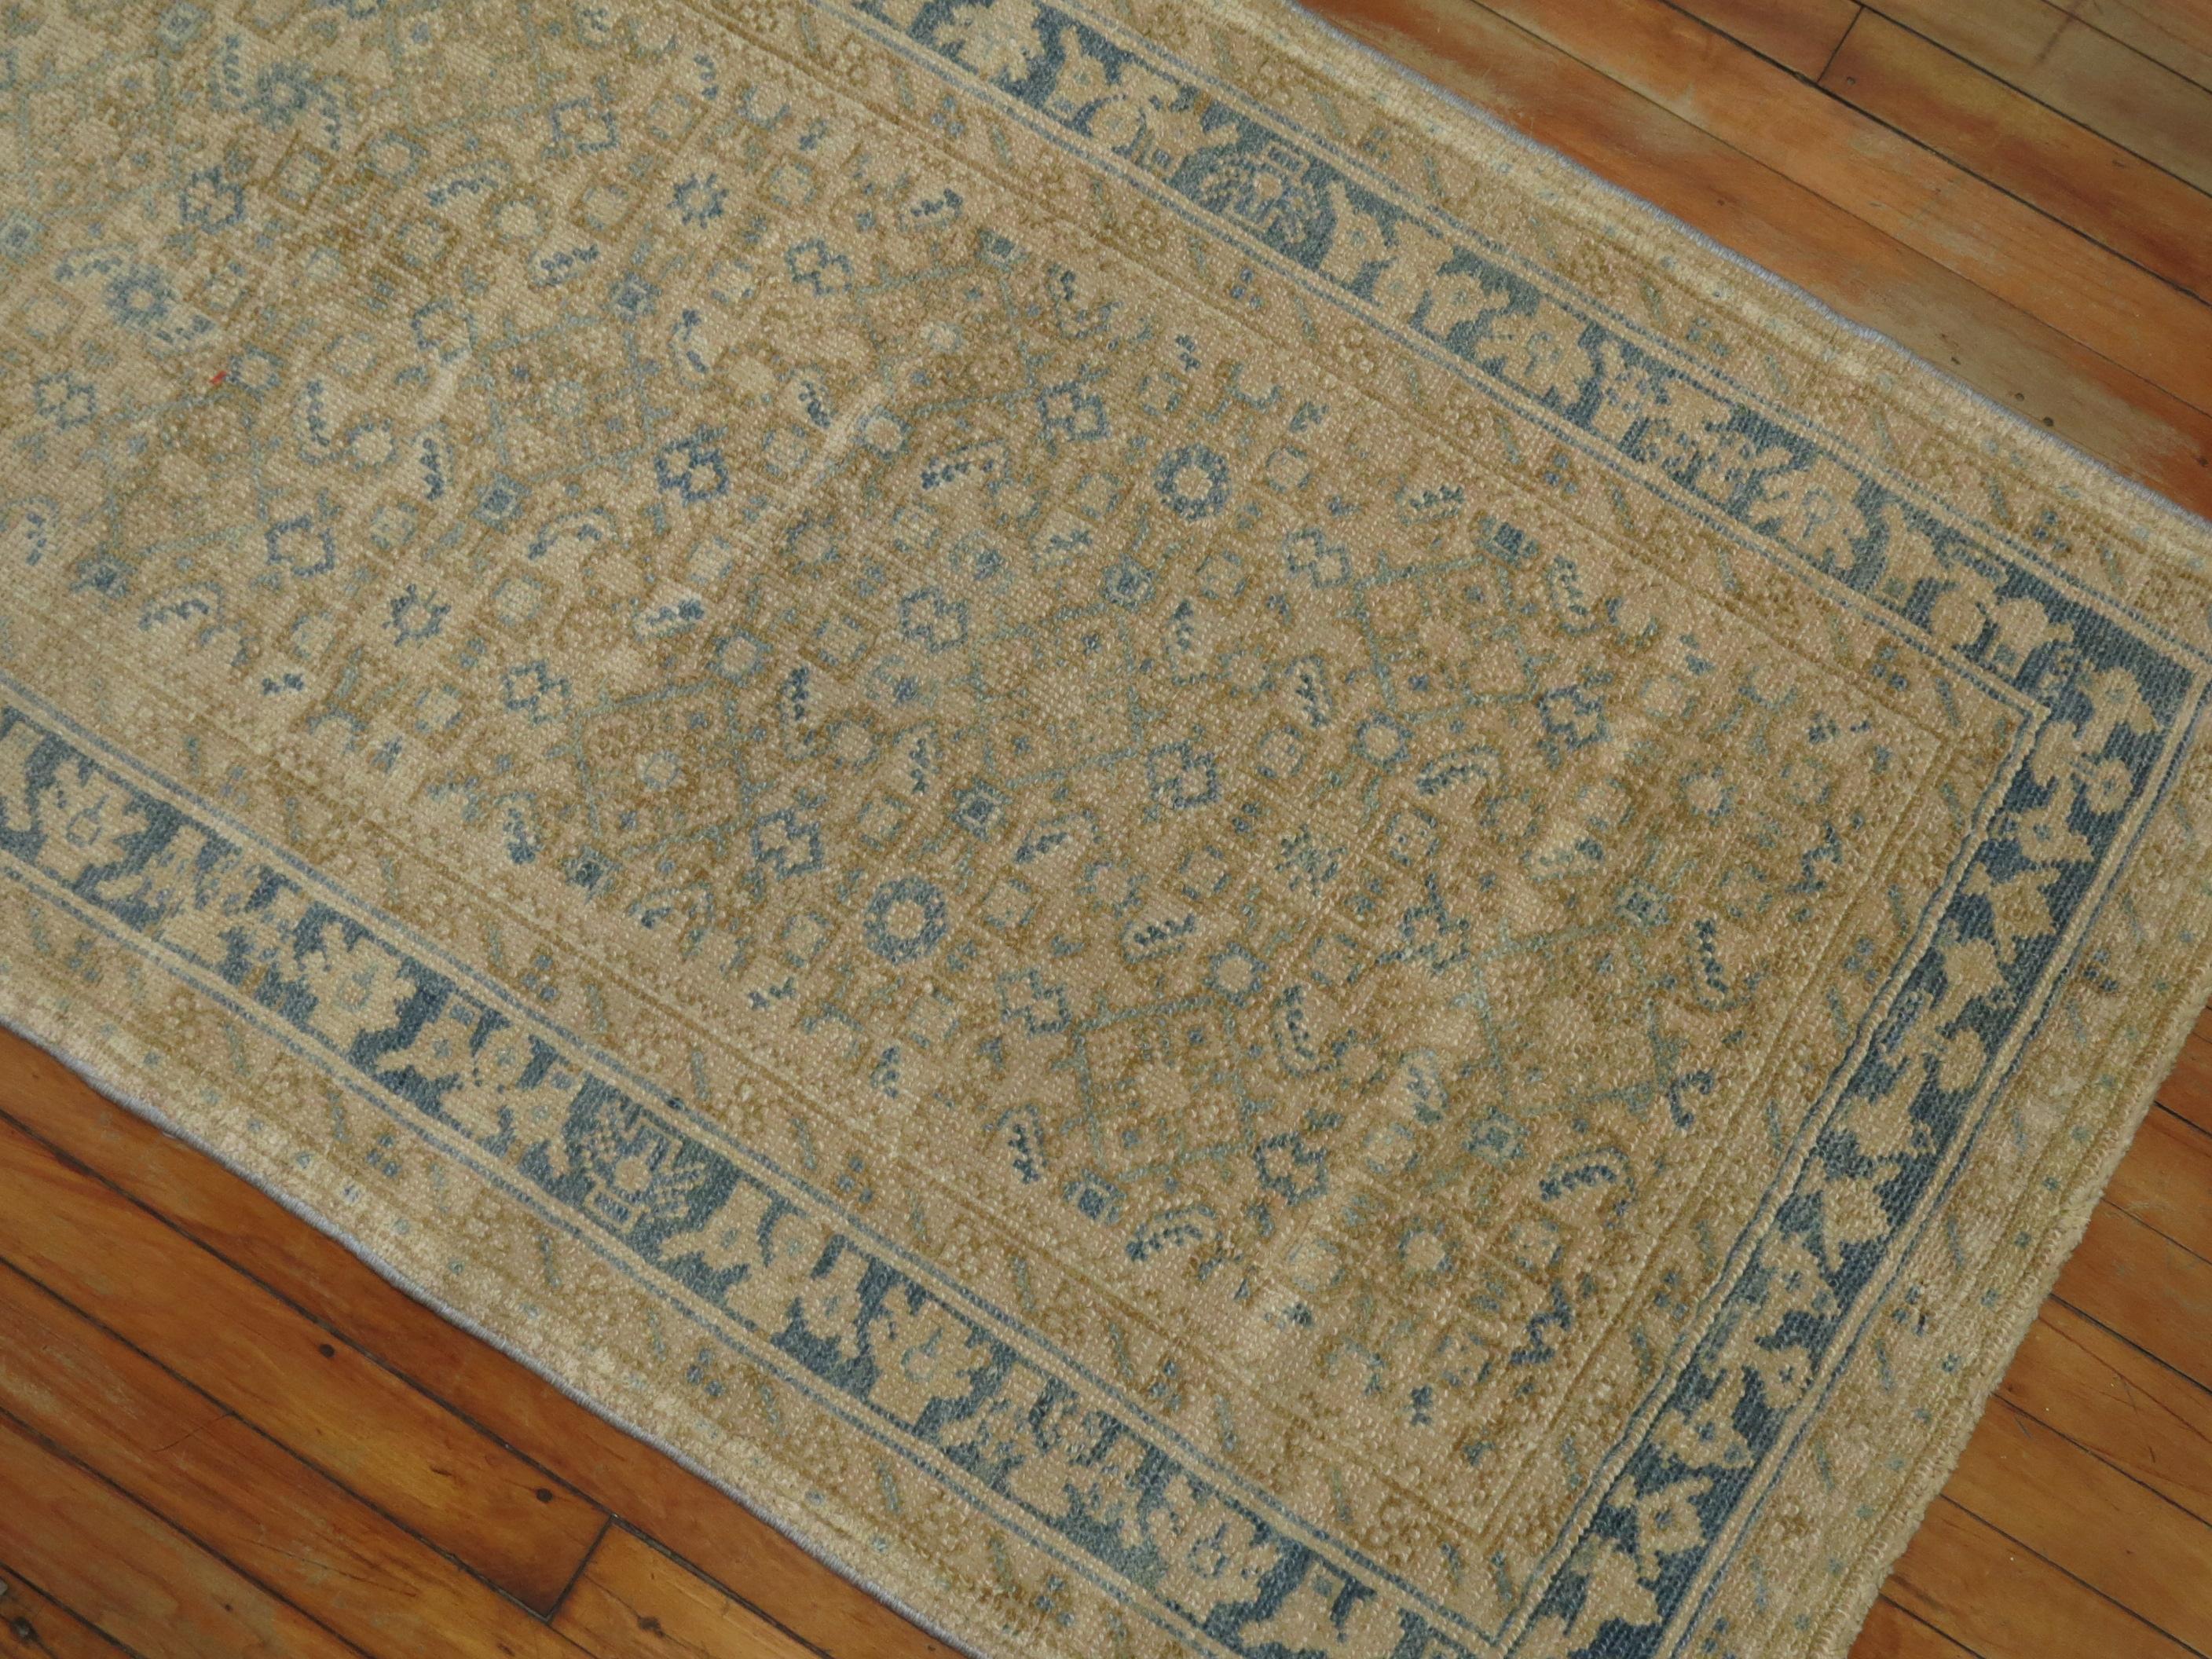 Spanish Colonial Sand Blue Color Geometric Persian Runner